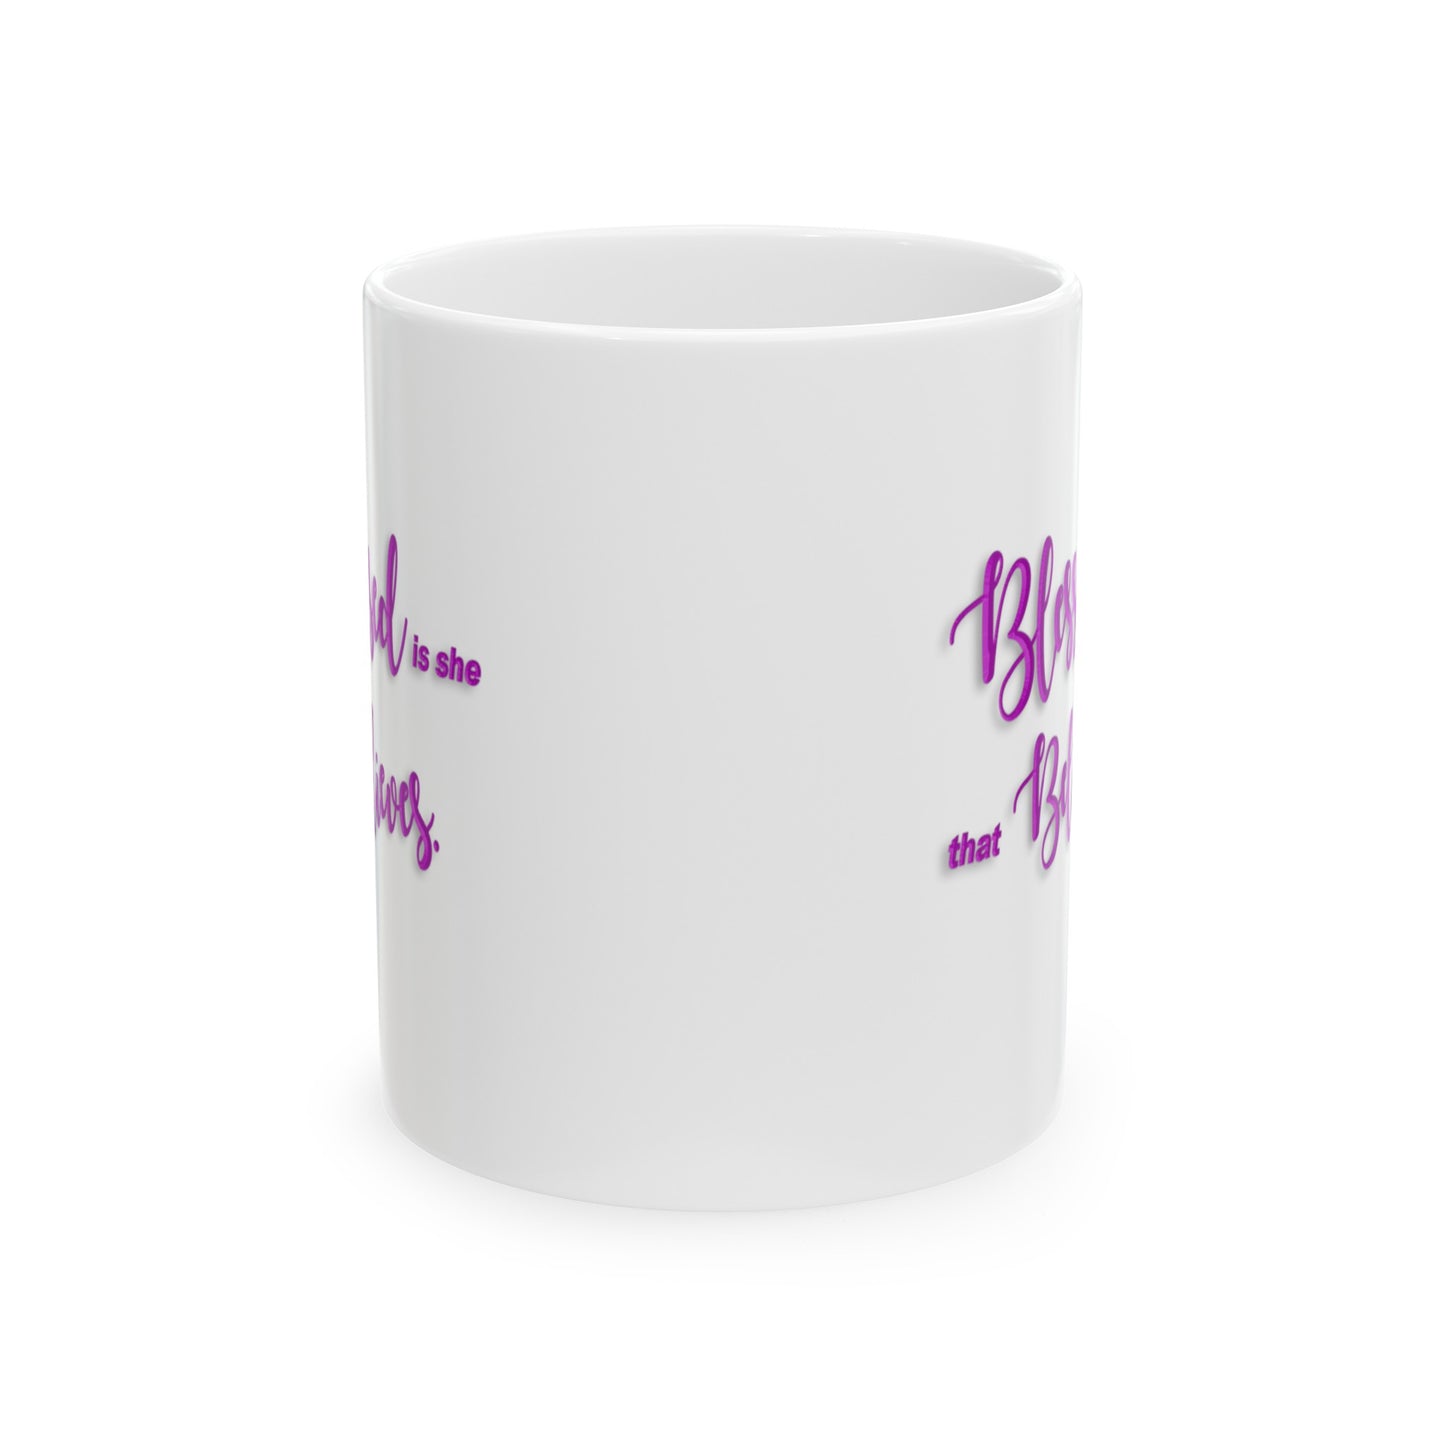 Believe and Be Blessed | Purple | Coffee Mug